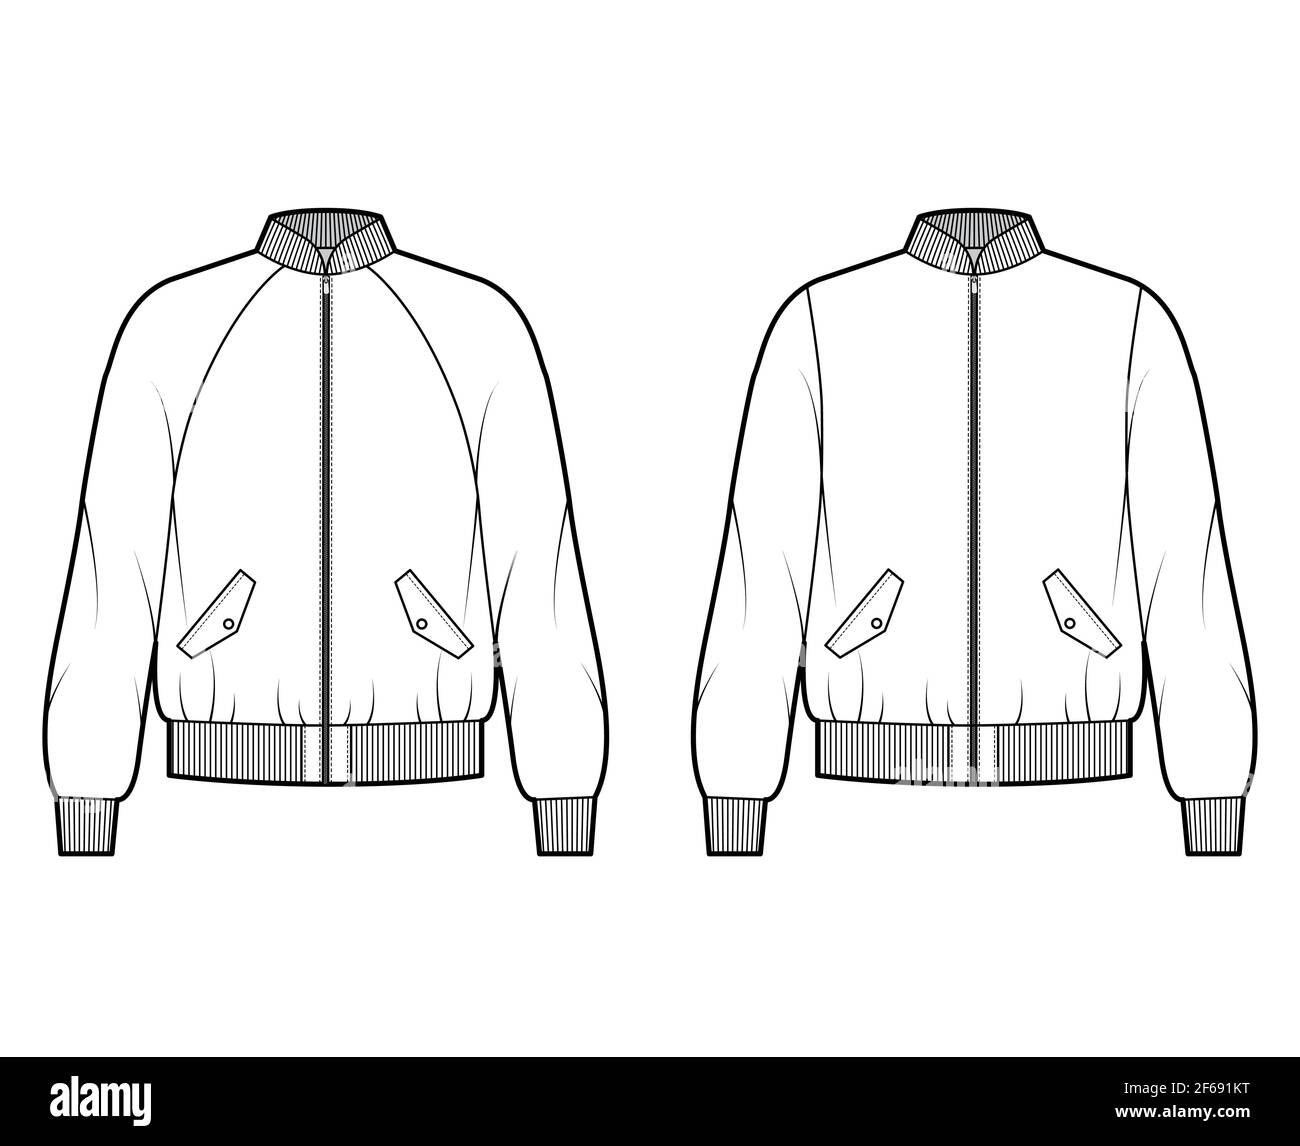 Set of Zip-up Bomber jackets technical fashion illustration with Rib baseball collar, cuffs, oversized, long raglan sleeves, flap pockets. Flat coat template front, white color. Women, men, unisex CAD Stock Vector